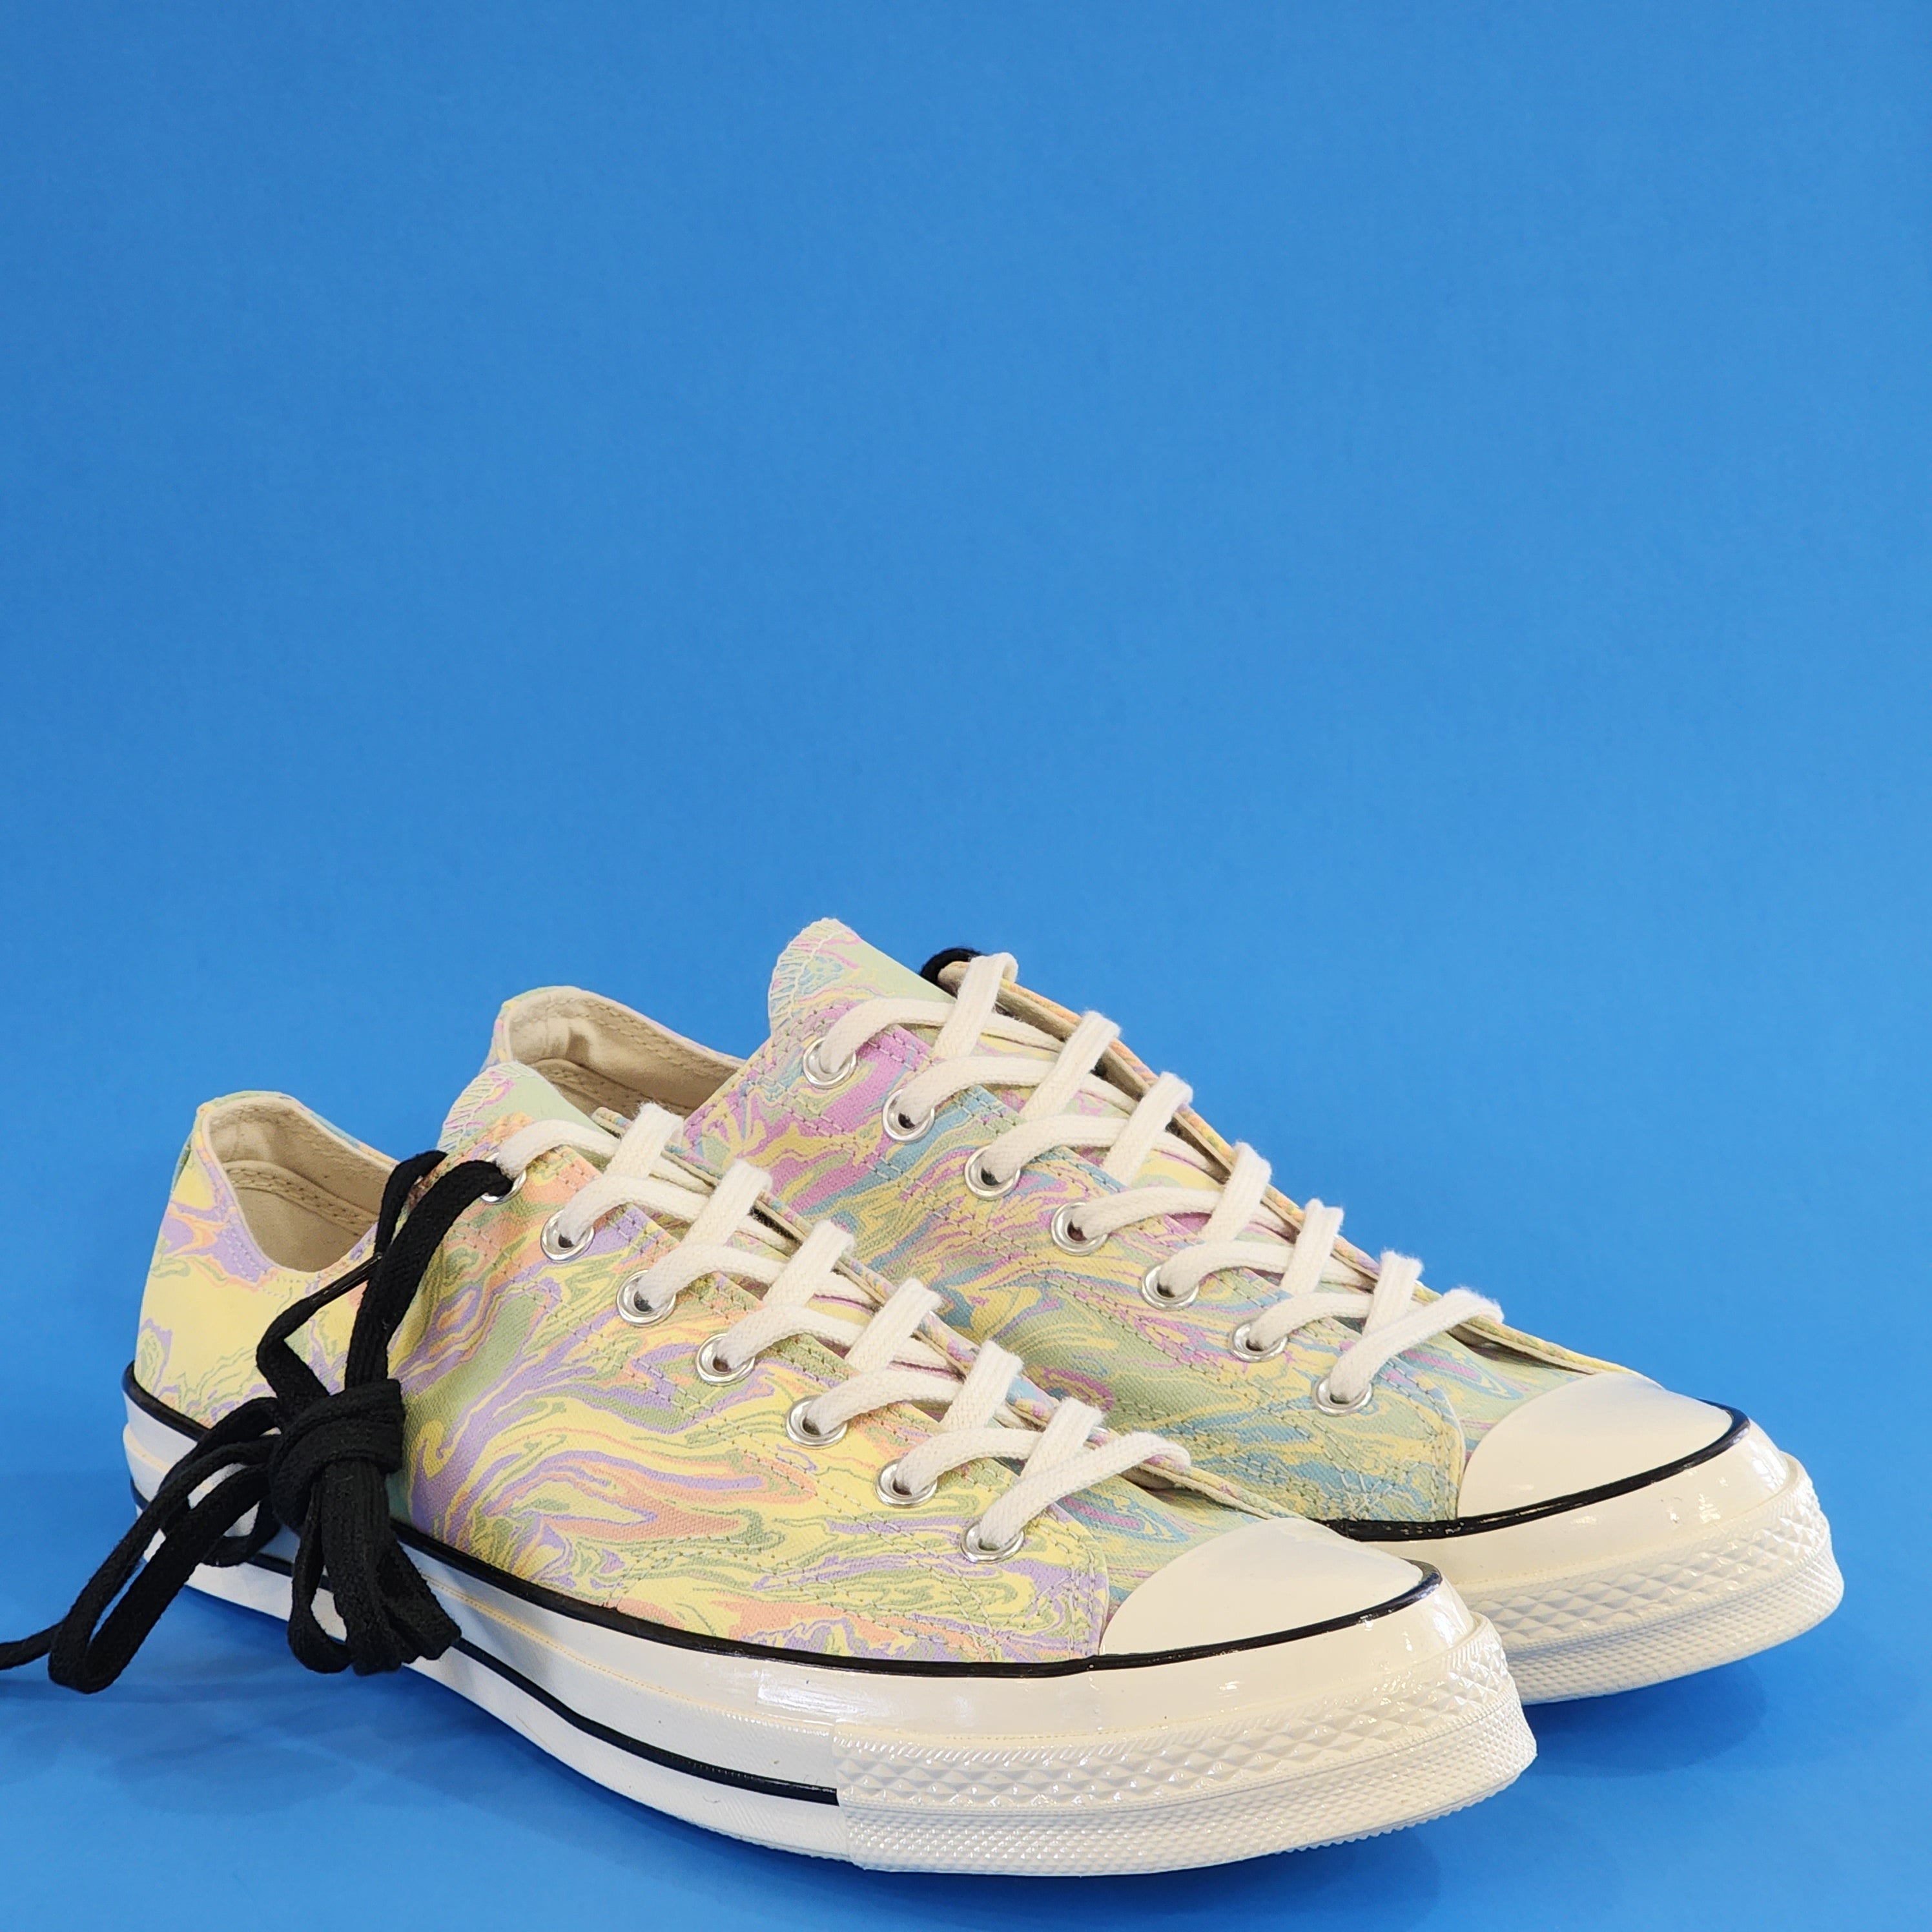 Converse Chuck 70 Low Ox Multicolor Marble Canvas Unisex Sneakers 167374C NWT